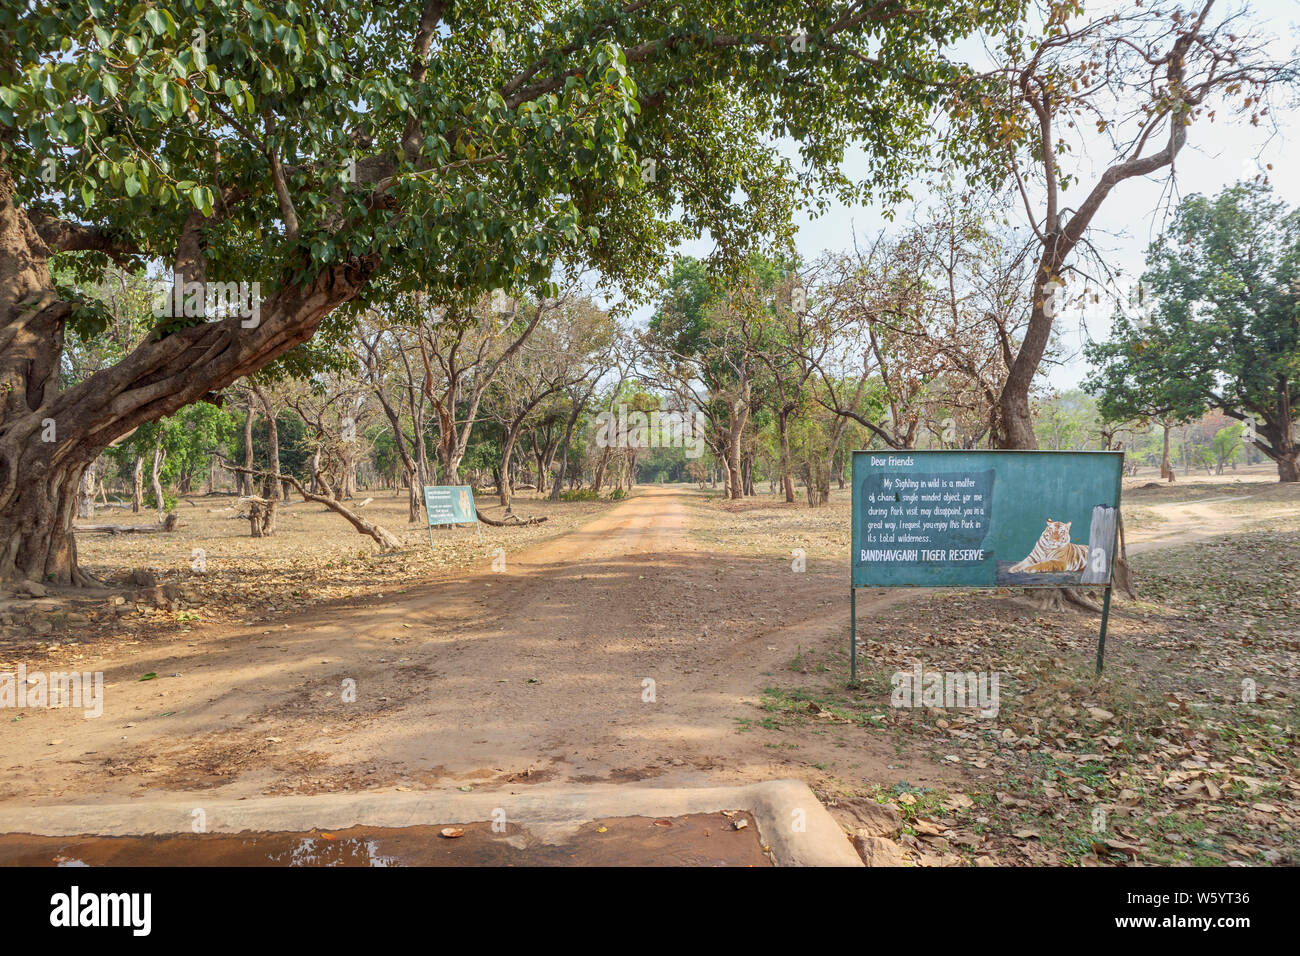 Sign at the Tala Gate entrance to Bandhavgarh Tiger Reserve in the National Park, Umaria district of the central Indian state of Madhya Pradesh Stock Photo